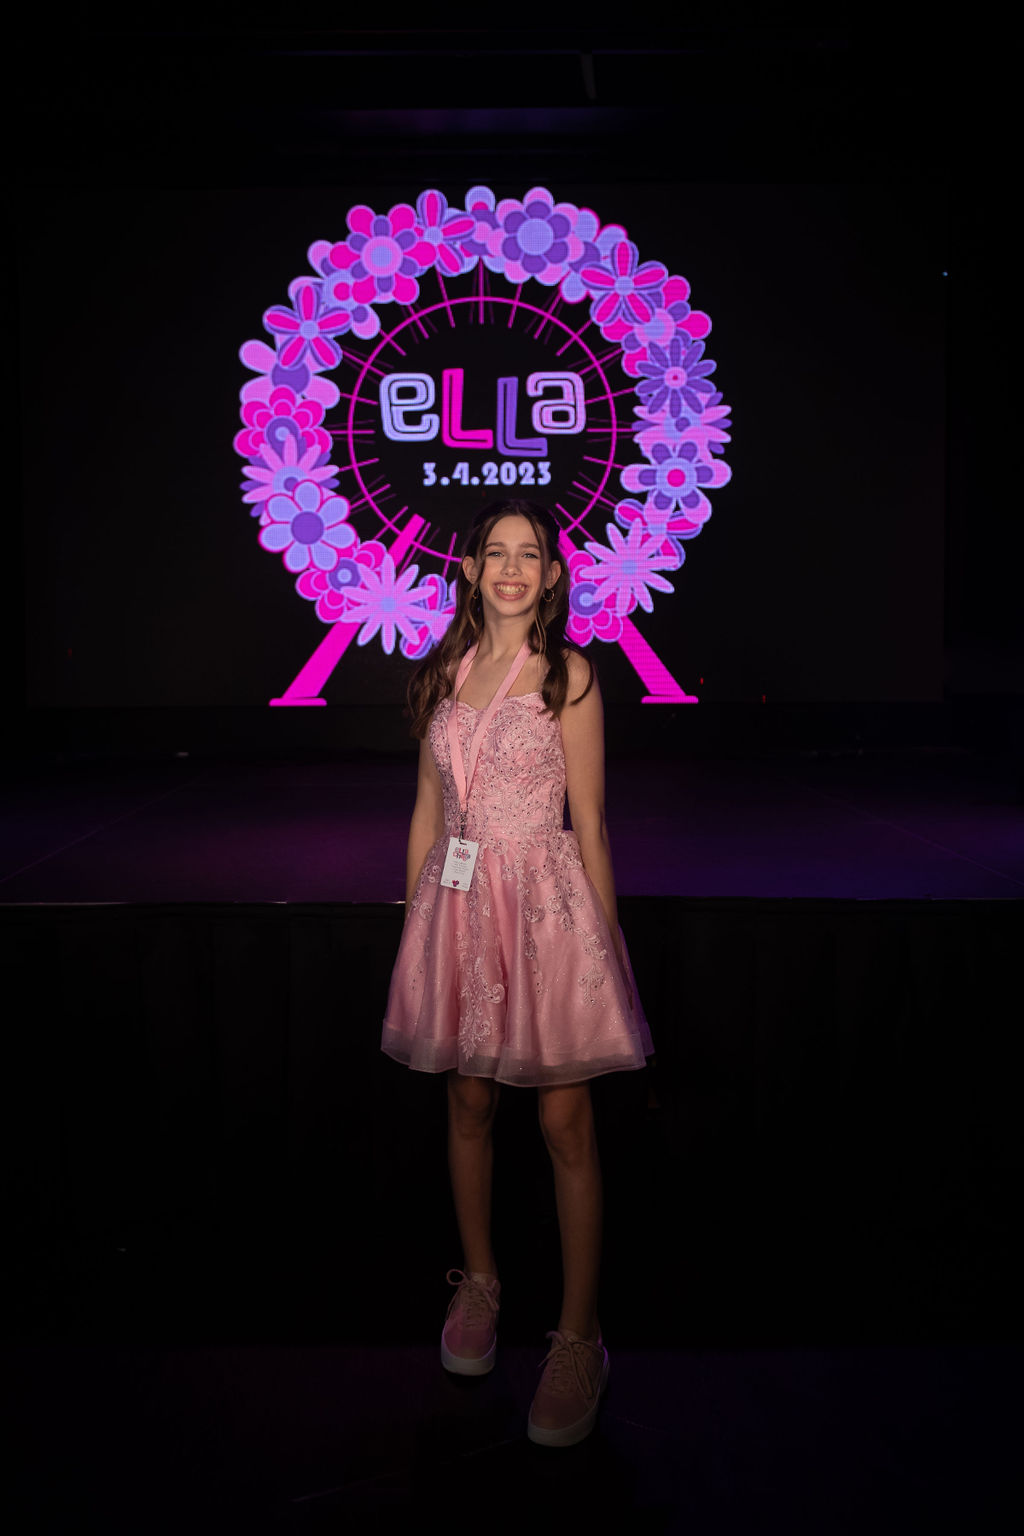 Ella had a wonderful time celebrating with friends and family at Ella Chella Coachella-inspired Bat Mitzvah Party at AMP in Bethesda, MD | Pop Color Events | Adding a Pop of Color to Bar & Bat Mitzvahs in DC, MD & VA | Photo by: Fillman Photo